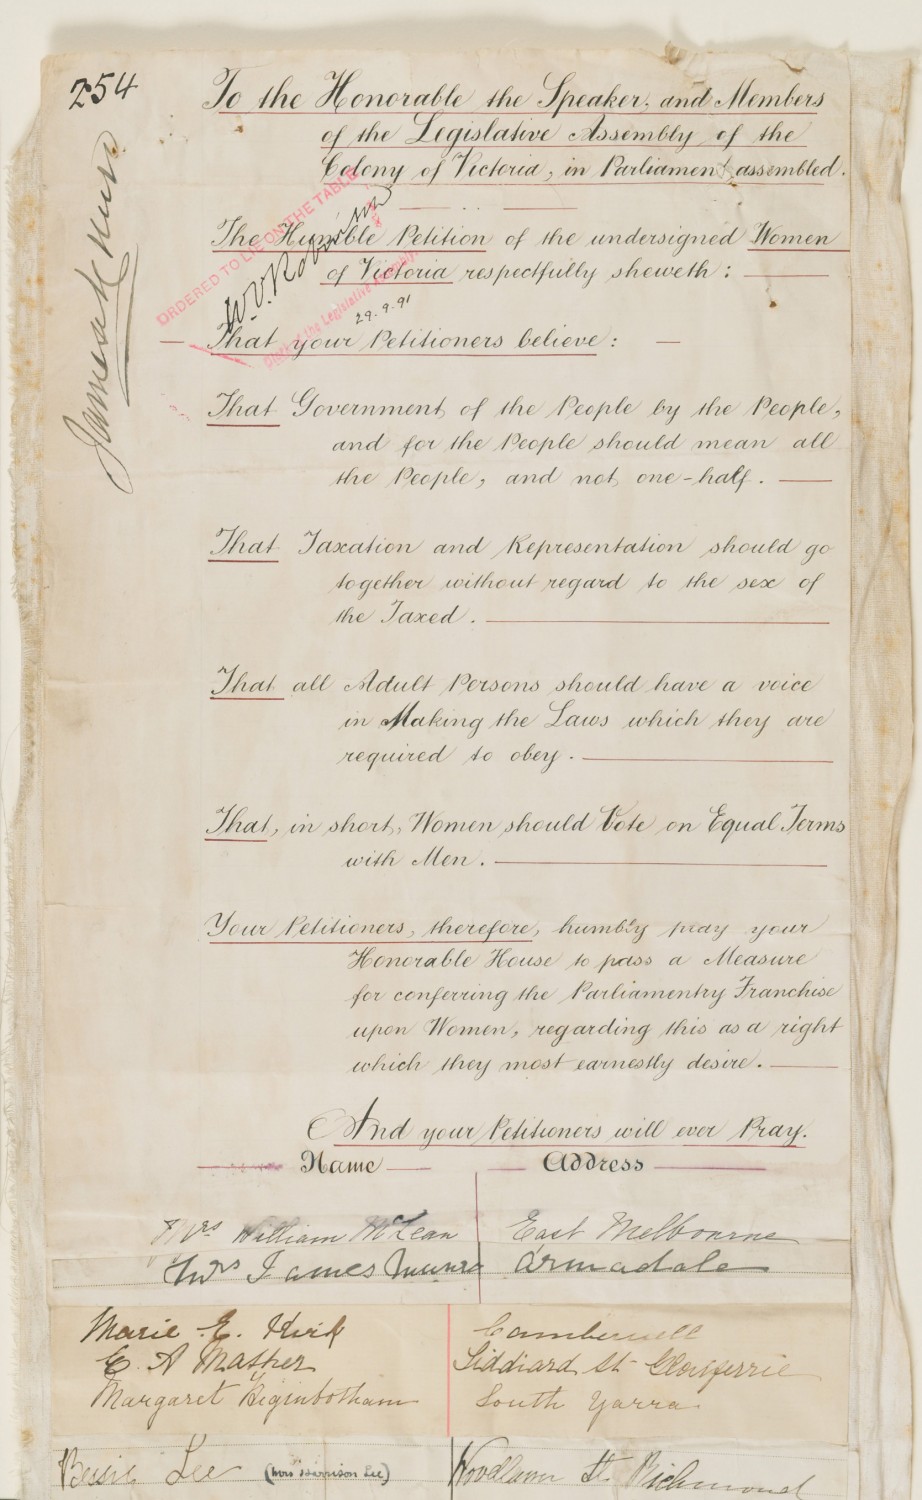 1891 Petition for Female Suffrage